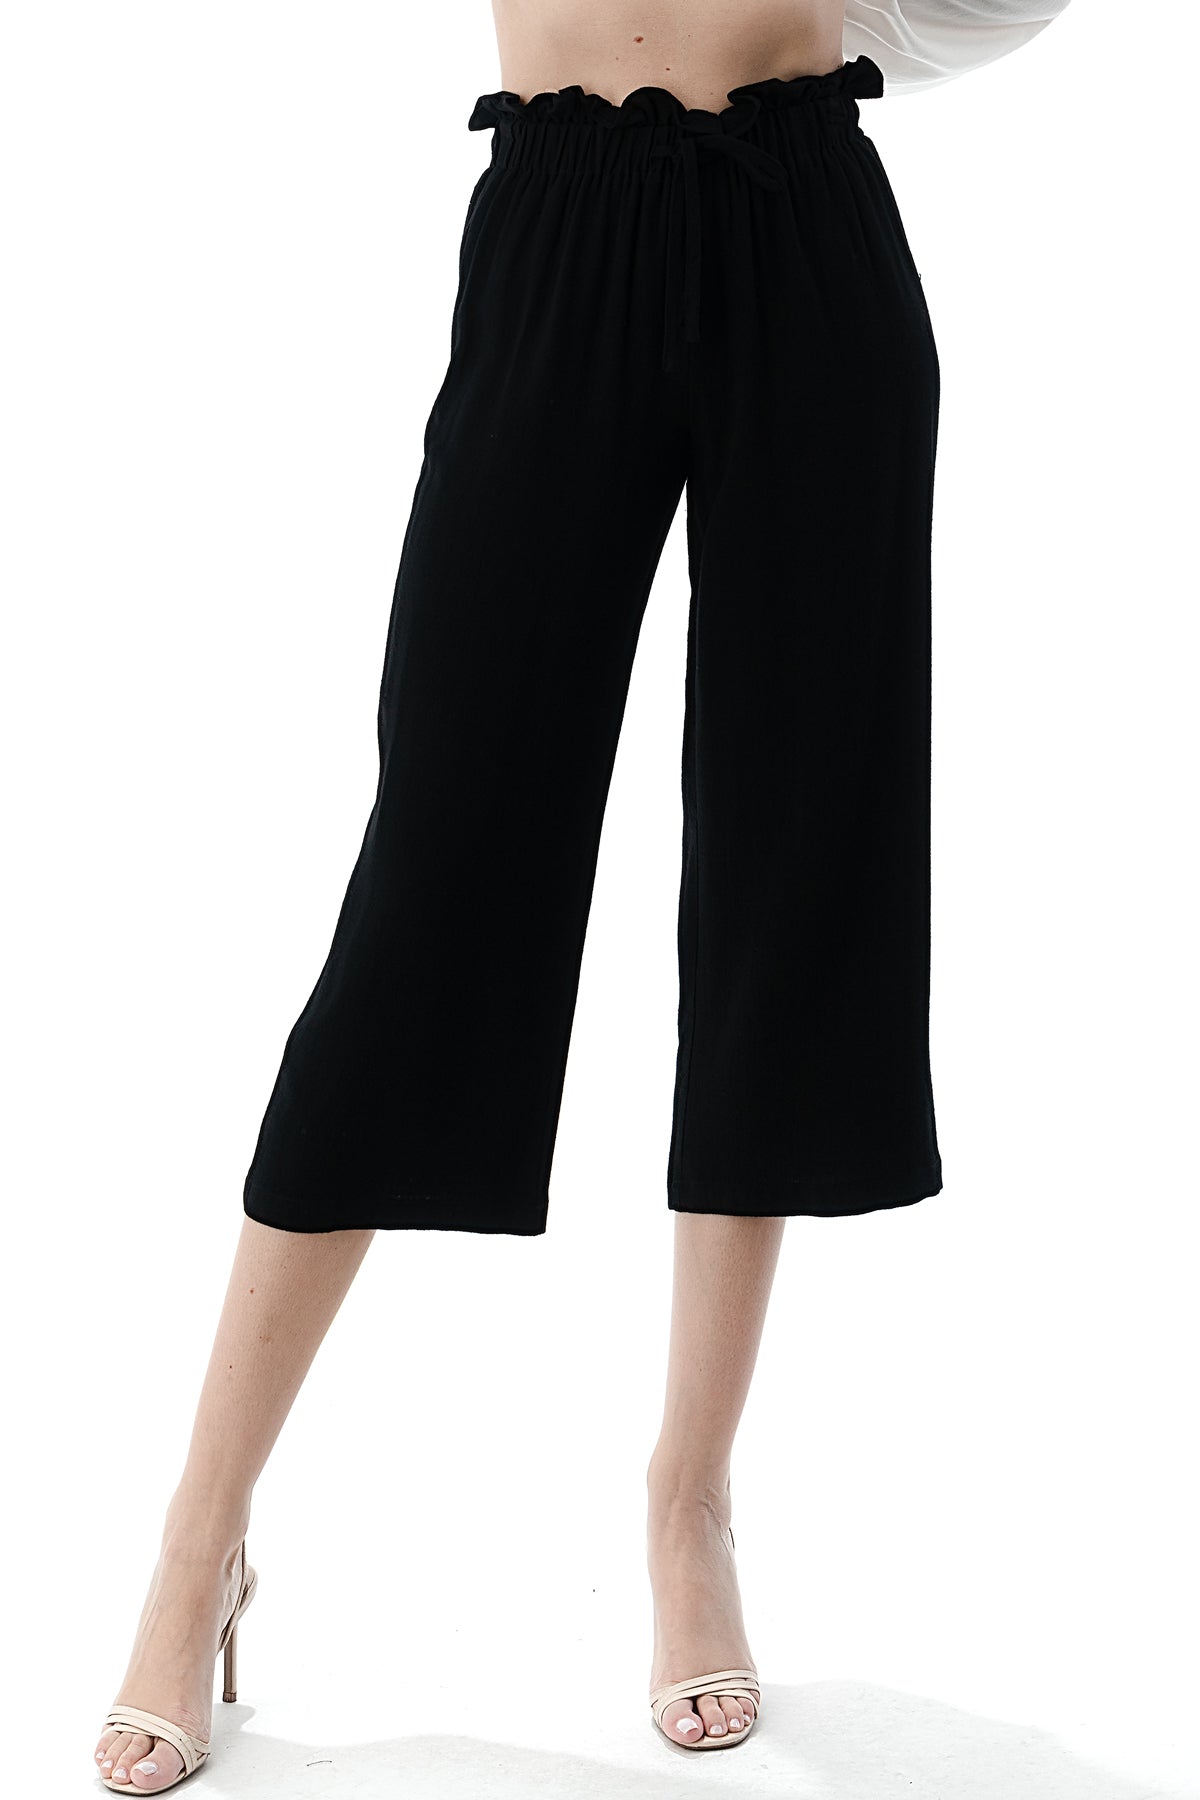 EDGY Land Girl's and Women's Drawstring Tie Shirred Ruffle Waist CroPPEd Fashion Pant